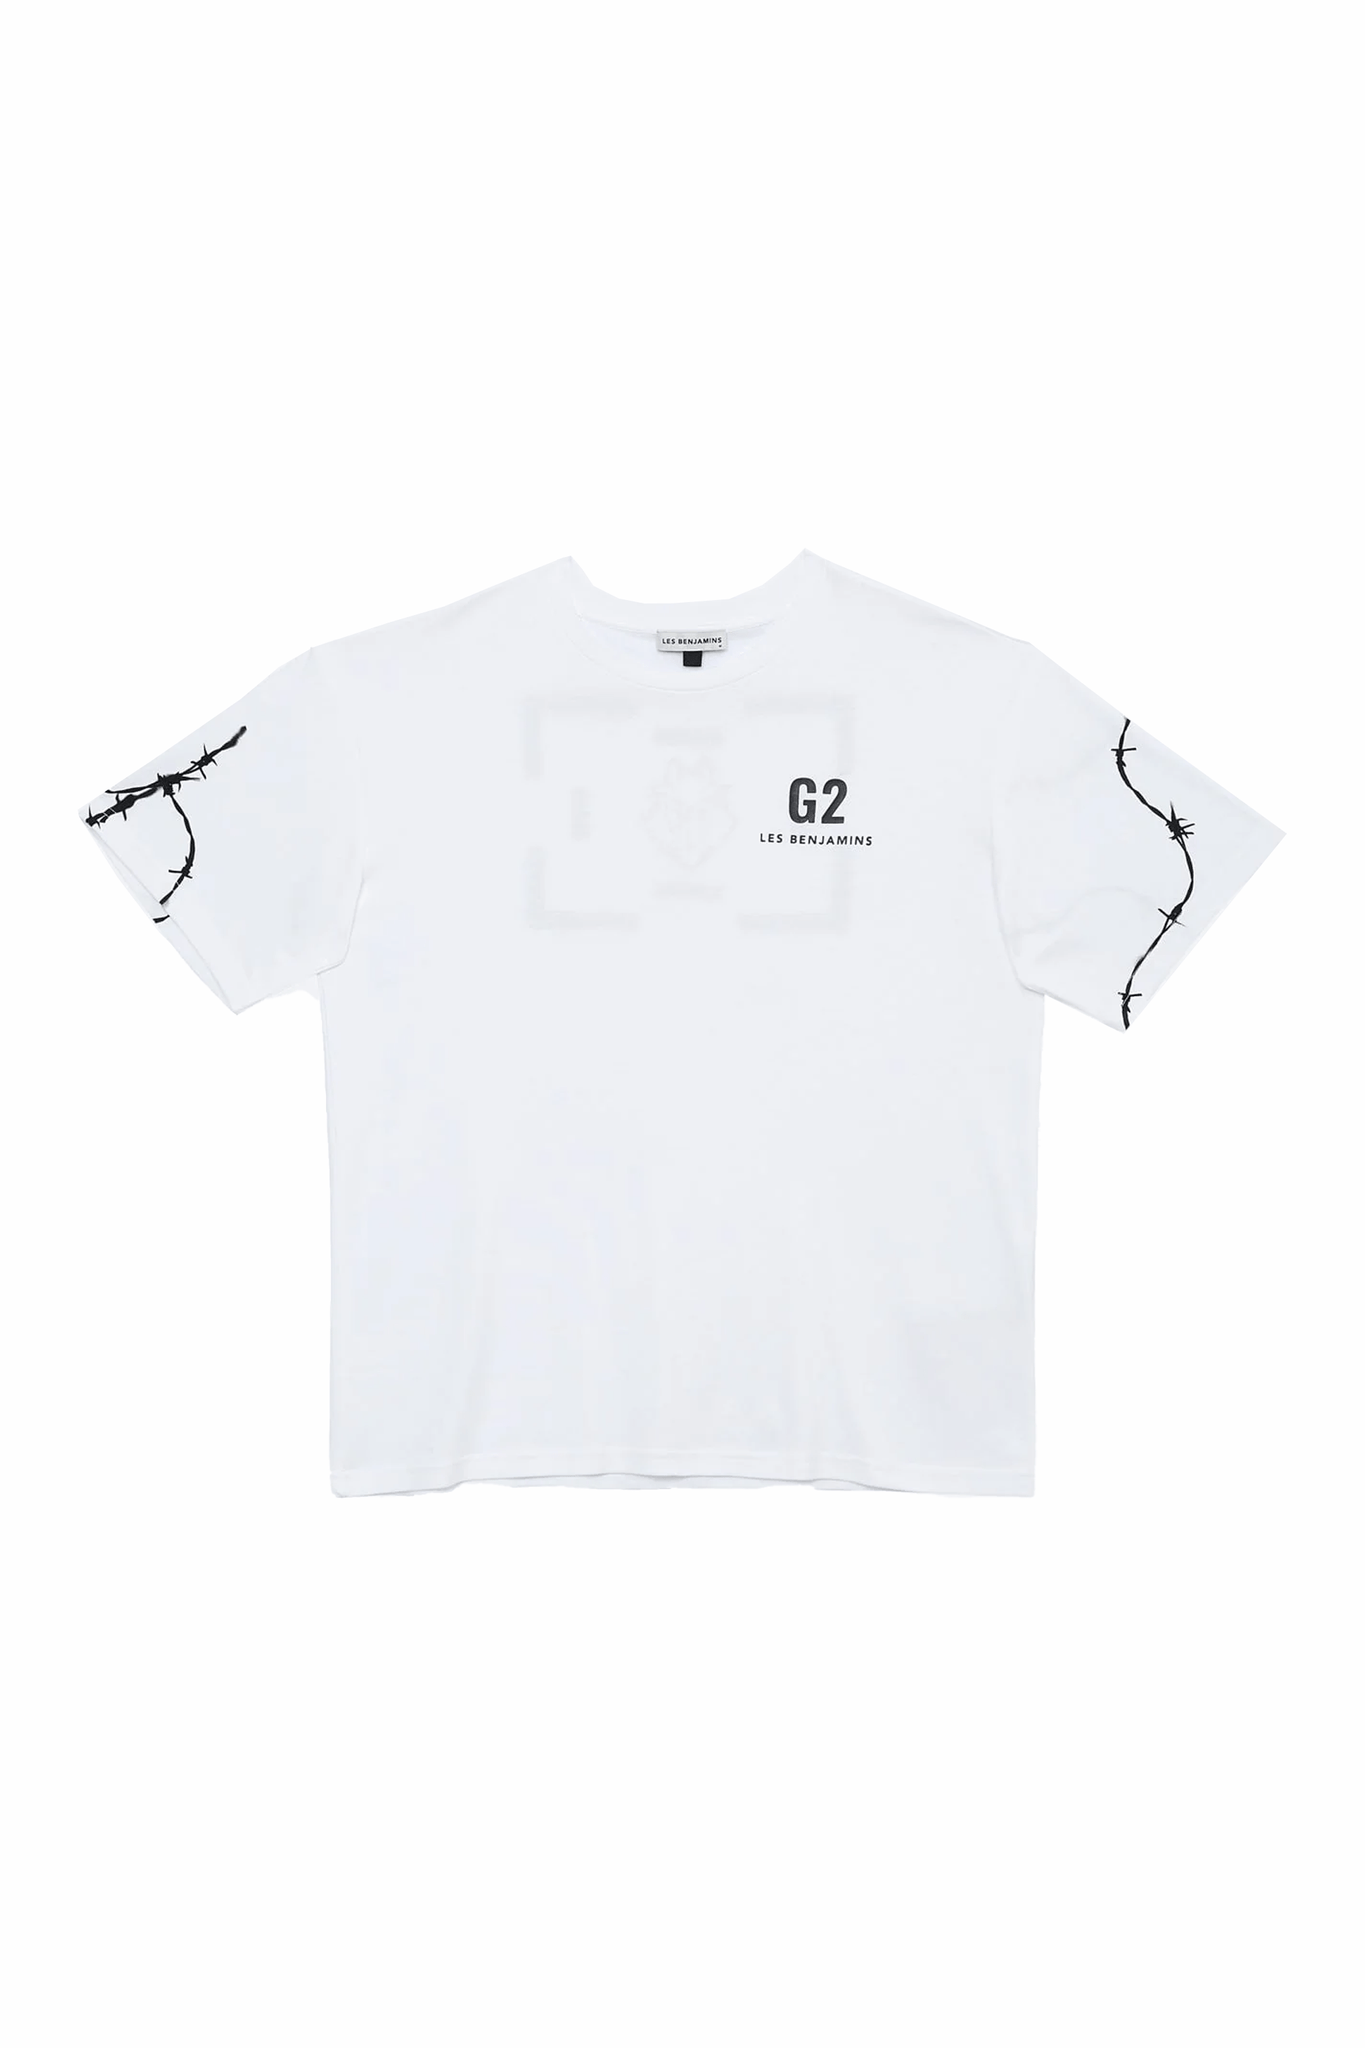 G2 x LB White T-shirt, a stylish fusion of G2 Esports and LES BENJAMINS. Elevate your fashion game while representing esports enthusiasm